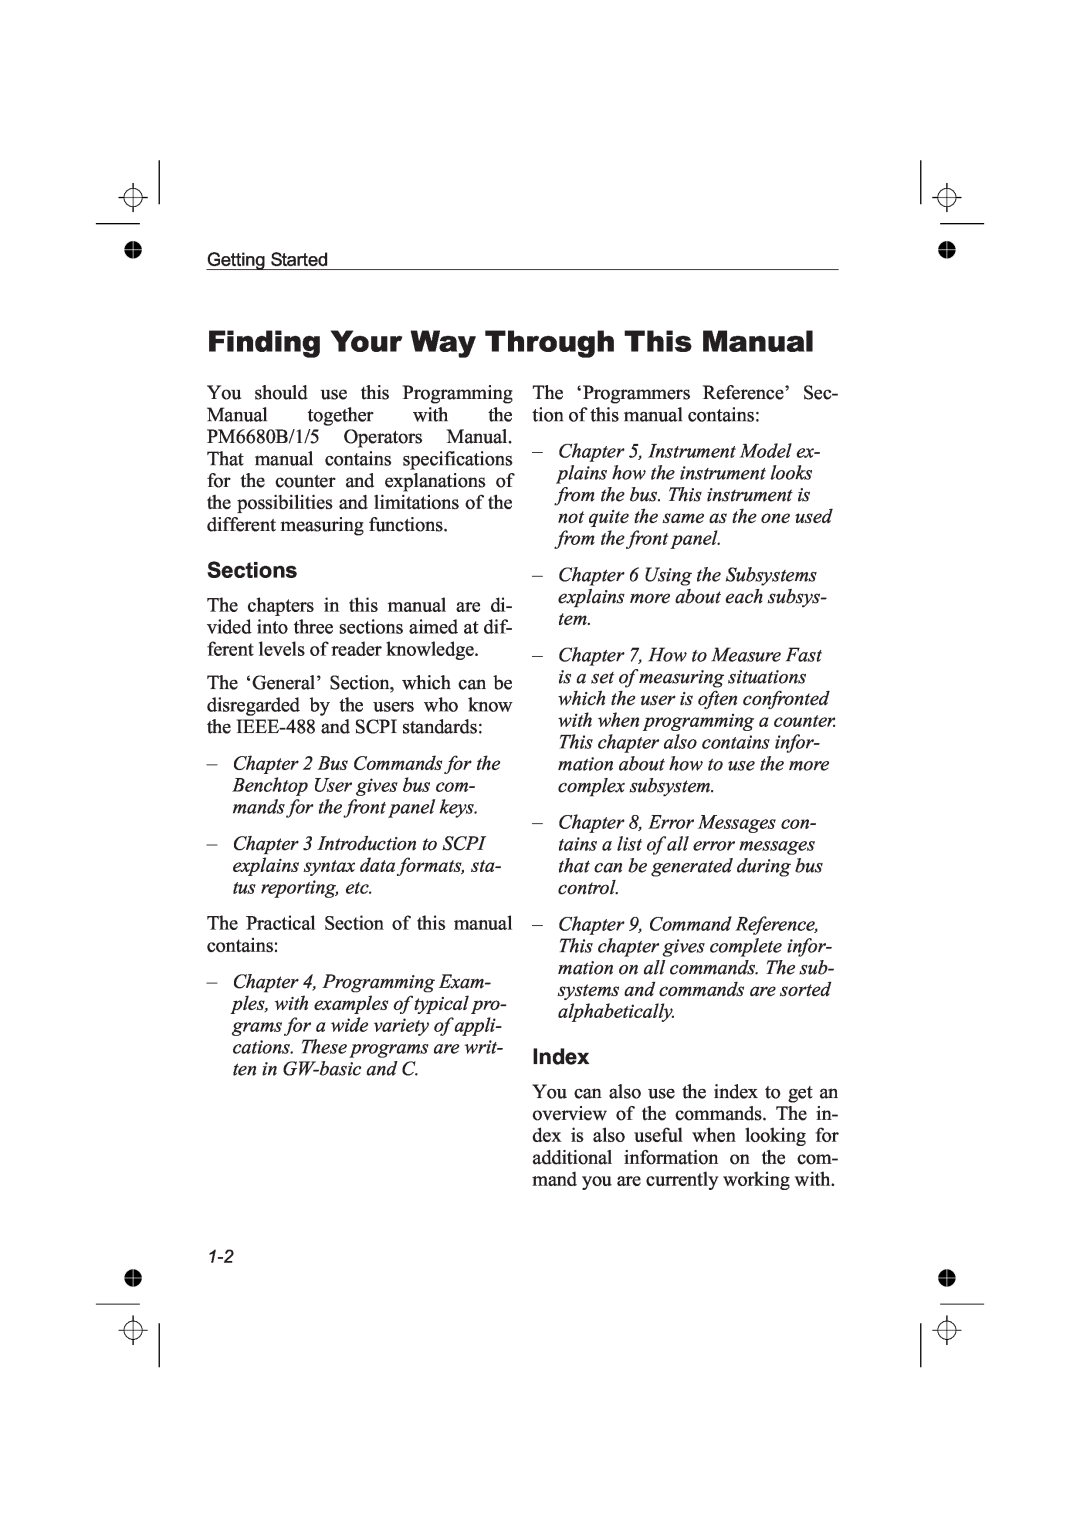 Fluke PM6681R, PM6685R manual Finding Your Way Through This Manual, Sections, Index 